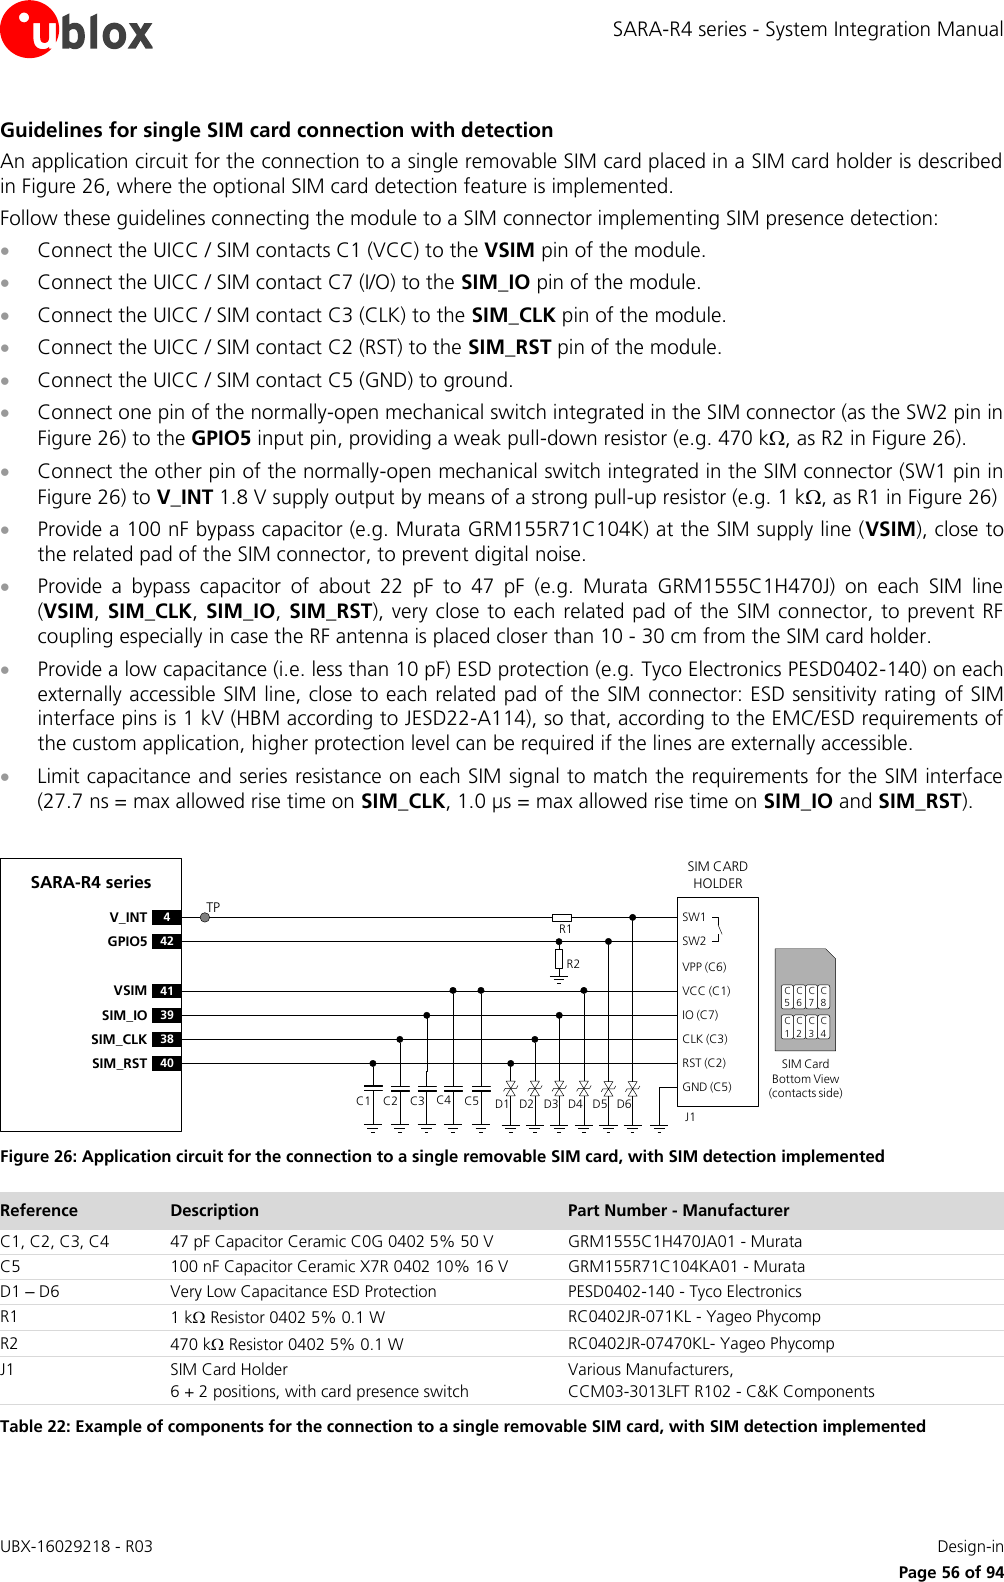 SARA-R4 series - System Integration Manual UBX-16029218 - R03    Design-in     Page 56 of 94 Guidelines for single SIM card connection with detection An application circuit for the connection to a single removable SIM card placed in a SIM card holder is described in Figure 26, where the optional SIM card detection feature is implemented. Follow these guidelines connecting the module to a SIM connector implementing SIM presence detection:  Connect the UICC / SIM contacts C1 (VCC) to the VSIM pin of the module.  Connect the UICC / SIM contact C7 (I/O) to the SIM_IO pin of the module.  Connect the UICC / SIM contact C3 (CLK) to the SIM_CLK pin of the module.  Connect the UICC / SIM contact C2 (RST) to the SIM_RST pin of the module.  Connect the UICC / SIM contact C5 (GND) to ground.  Connect one pin of the normally-open mechanical switch integrated in the SIM connector (as the SW2 pin in Figure 26) to the GPIO5 input pin, providing a weak pull-down resistor (e.g. 470 k, as R2 in Figure 26).  Connect the other pin of the normally-open mechanical switch integrated in the SIM connector (SW1 pin in Figure 26) to V_INT 1.8 V supply output by means of a strong pull-up resistor (e.g. 1 k, as R1 in Figure 26)  Provide a 100 nF bypass capacitor (e.g. Murata GRM155R71C104K) at the SIM supply line (VSIM), close to the related pad of the SIM connector, to prevent digital noise.   Provide  a  bypass  capacitor  of  about  22  pF  to  47  pF  (e.g.  Murata  GRM1555C1H470J)  on  each  SIM  line (VSIM, SIM_CLK, SIM_IO,  SIM_RST), very close to each related pad of the SIM connector, to prevent RF coupling especially in case the RF antenna is placed closer than 10 - 30 cm from the SIM card holder.  Provide a low capacitance (i.e. less than 10 pF) ESD protection (e.g. Tyco Electronics PESD0402-140) on each externally accessible SIM line, close to each related pad of the SIM connector: ESD sensitivity rating  of SIM interface pins is 1 kV (HBM according to JESD22-A114), so that, according to the EMC/ESD requirements of the custom application, higher protection level can be required if the lines are externally accessible.   Limit capacitance and series resistance on each SIM signal to match the requirements for the SIM interface (27.7 ns = max allowed rise time on SIM_CLK, 1.0 µs = max allowed rise time on SIM_IO and SIM_RST).  SARA-R4 series41VSIM39SIM_IO38SIM_CLK40SIM_RST4V_INT42GPIO5SIM CARD HOLDERC5C6C7C1C2C3SIM Card Bottom View (contacts side)C1VPP (C6)VCC (C1)IO (C7)CLK (C3)RST (C2)GND (C5)C2 C3 C5J1C4SW1SW2D1 D2 D3 D4 D5 D6R2R1C8C4TP Figure 26: Application circuit for the connection to a single removable SIM card, with SIM detection implemented Reference Description Part Number - Manufacturer C1, C2, C3, C4 47 pF Capacitor Ceramic C0G 0402 5% 50 V GRM1555C1H470JA01 - Murata C5 100 nF Capacitor Ceramic X7R 0402 10% 16 V GRM155R71C104KA01 - Murata D1 – D6 Very Low Capacitance ESD Protection PESD0402-140 - Tyco Electronics  R1 1 k Resistor 0402 5% 0.1 W RC0402JR-071KL - Yageo Phycomp R2 470 k Resistor 0402 5% 0.1 W RC0402JR-07470KL- Yageo Phycomp J1 SIM Card Holder 6 + 2 positions, with card presence switch Various Manufacturers, CCM03-3013LFT R102 - C&amp;K Components Table 22: Example of components for the connection to a single removable SIM card, with SIM detection implemented  